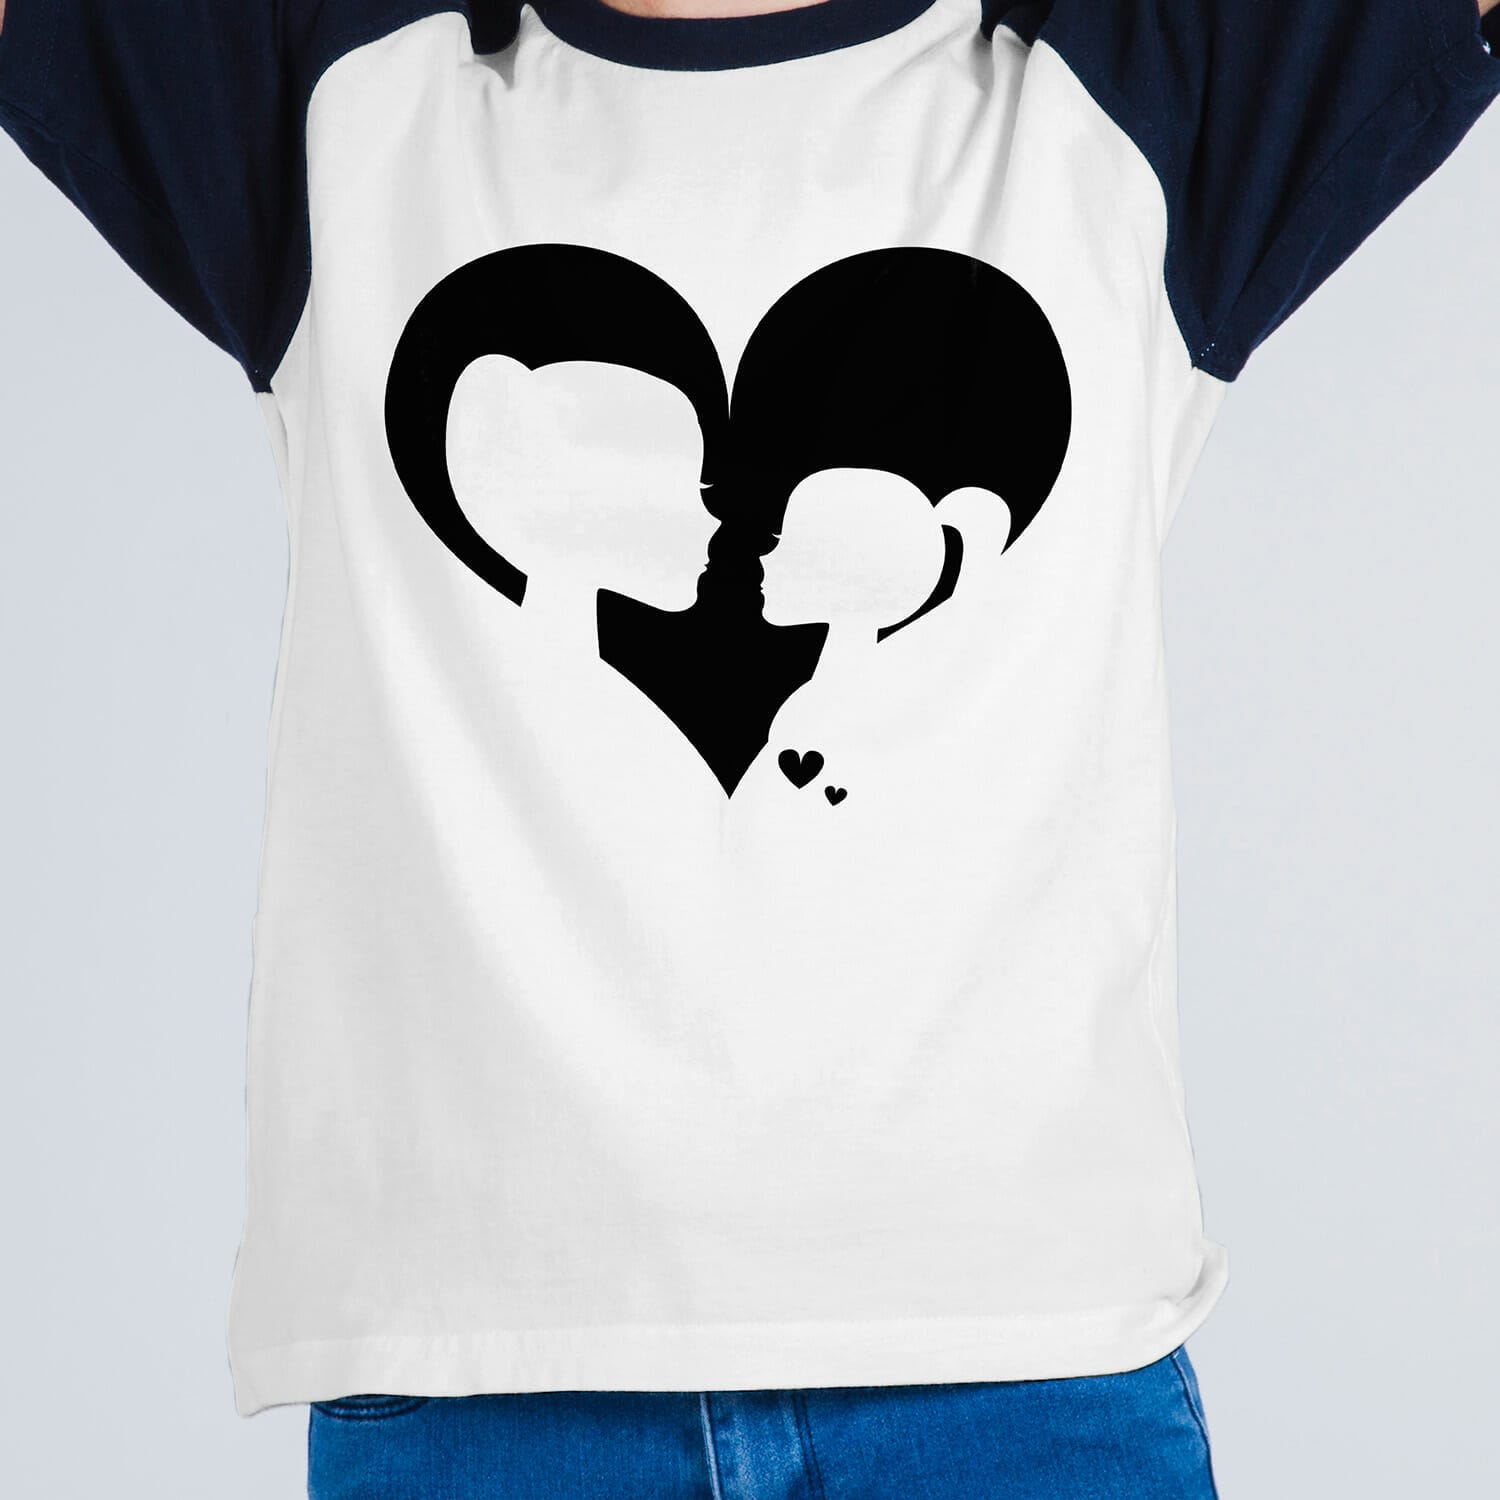 Mom and daughter love tshirt design